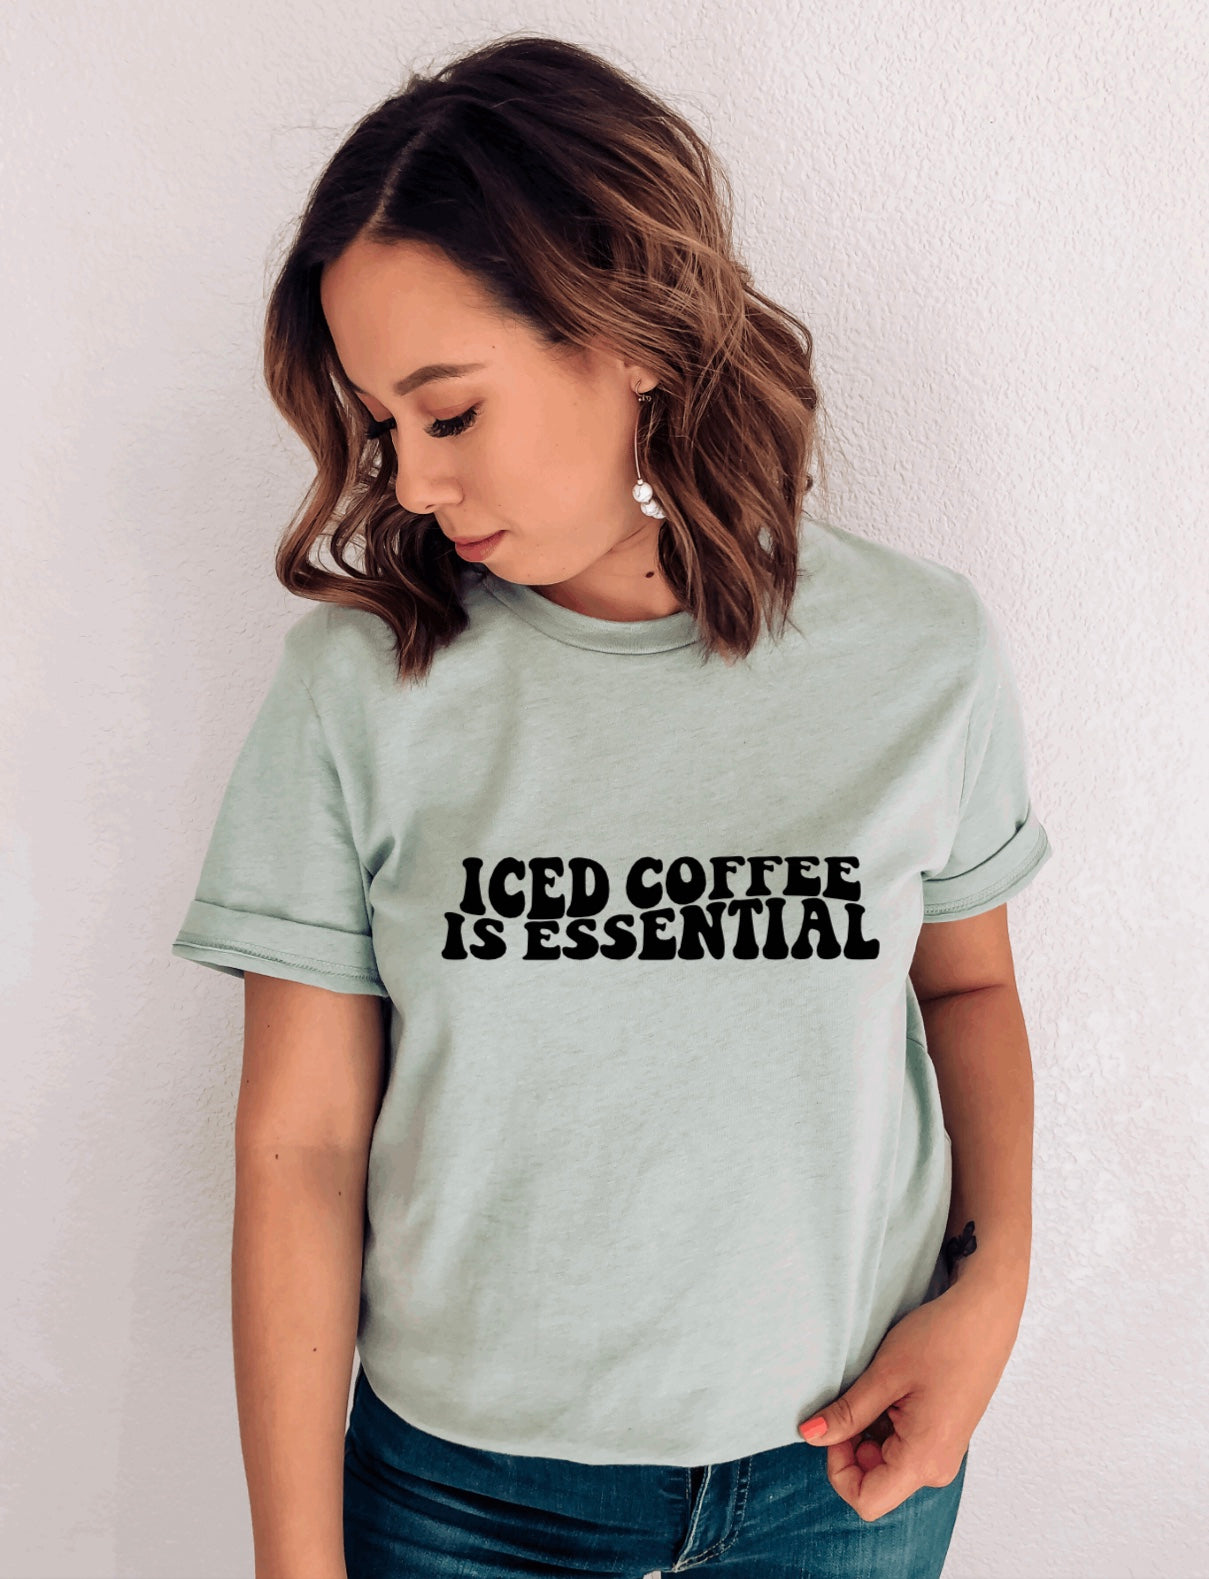 Iced Coffee is essential t-shirt 